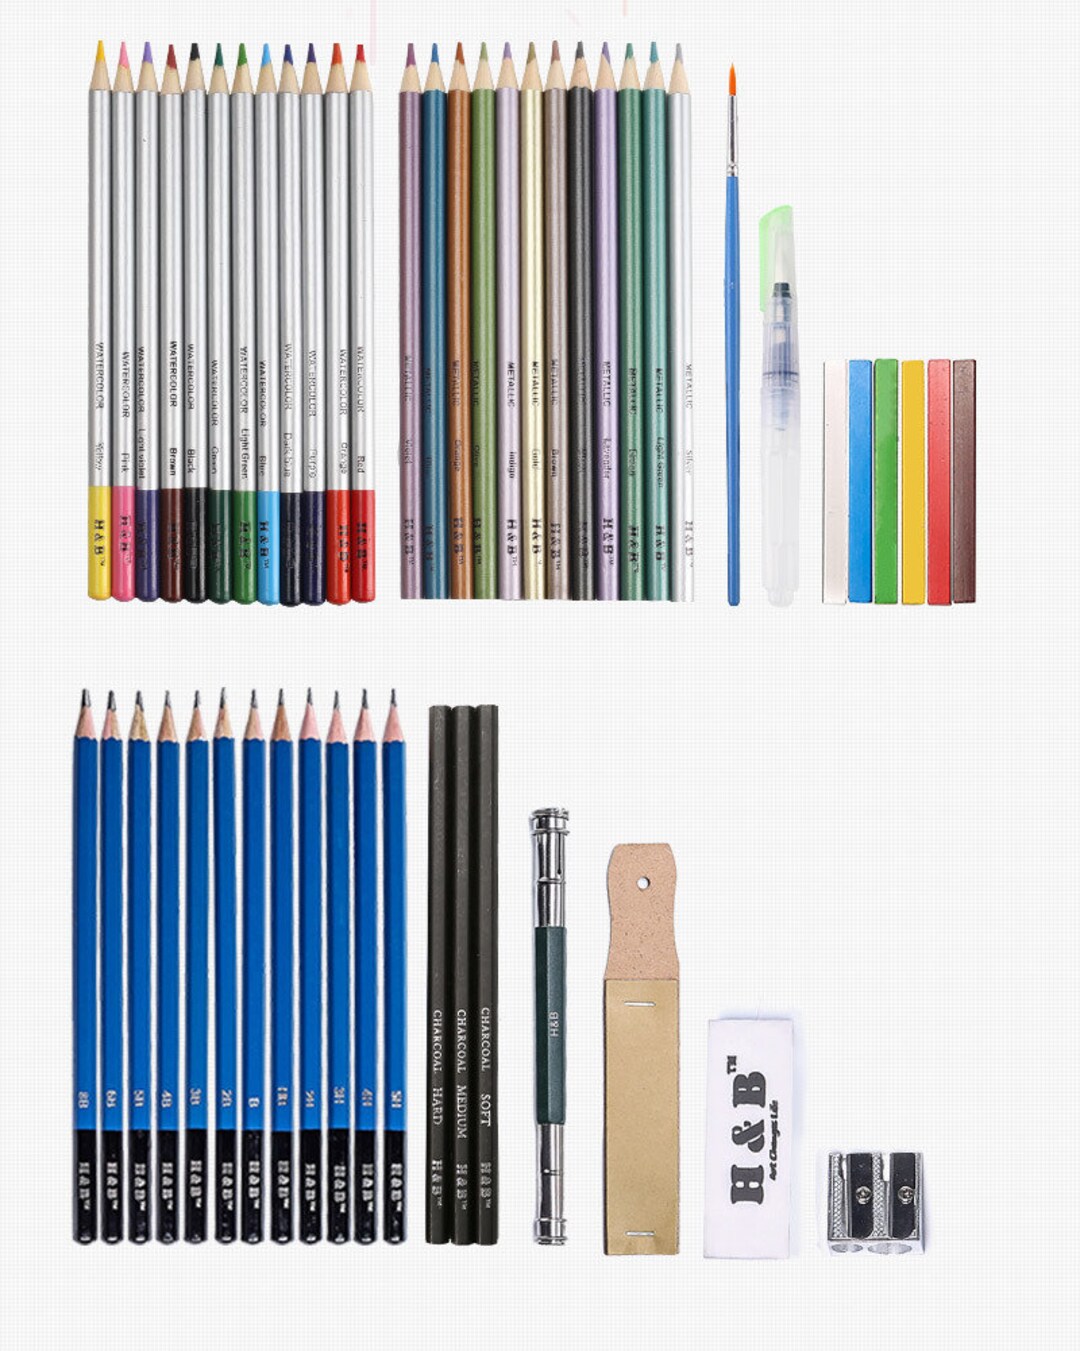 51-Piece Colored Pencils Set, Drawing Pencils and Sketching Kit, Complete Artist  Kit, Includes Graphite Pencils, Metallic Color Pencils, Water-soluble Color  Pencils Sketch Kit for Drawing